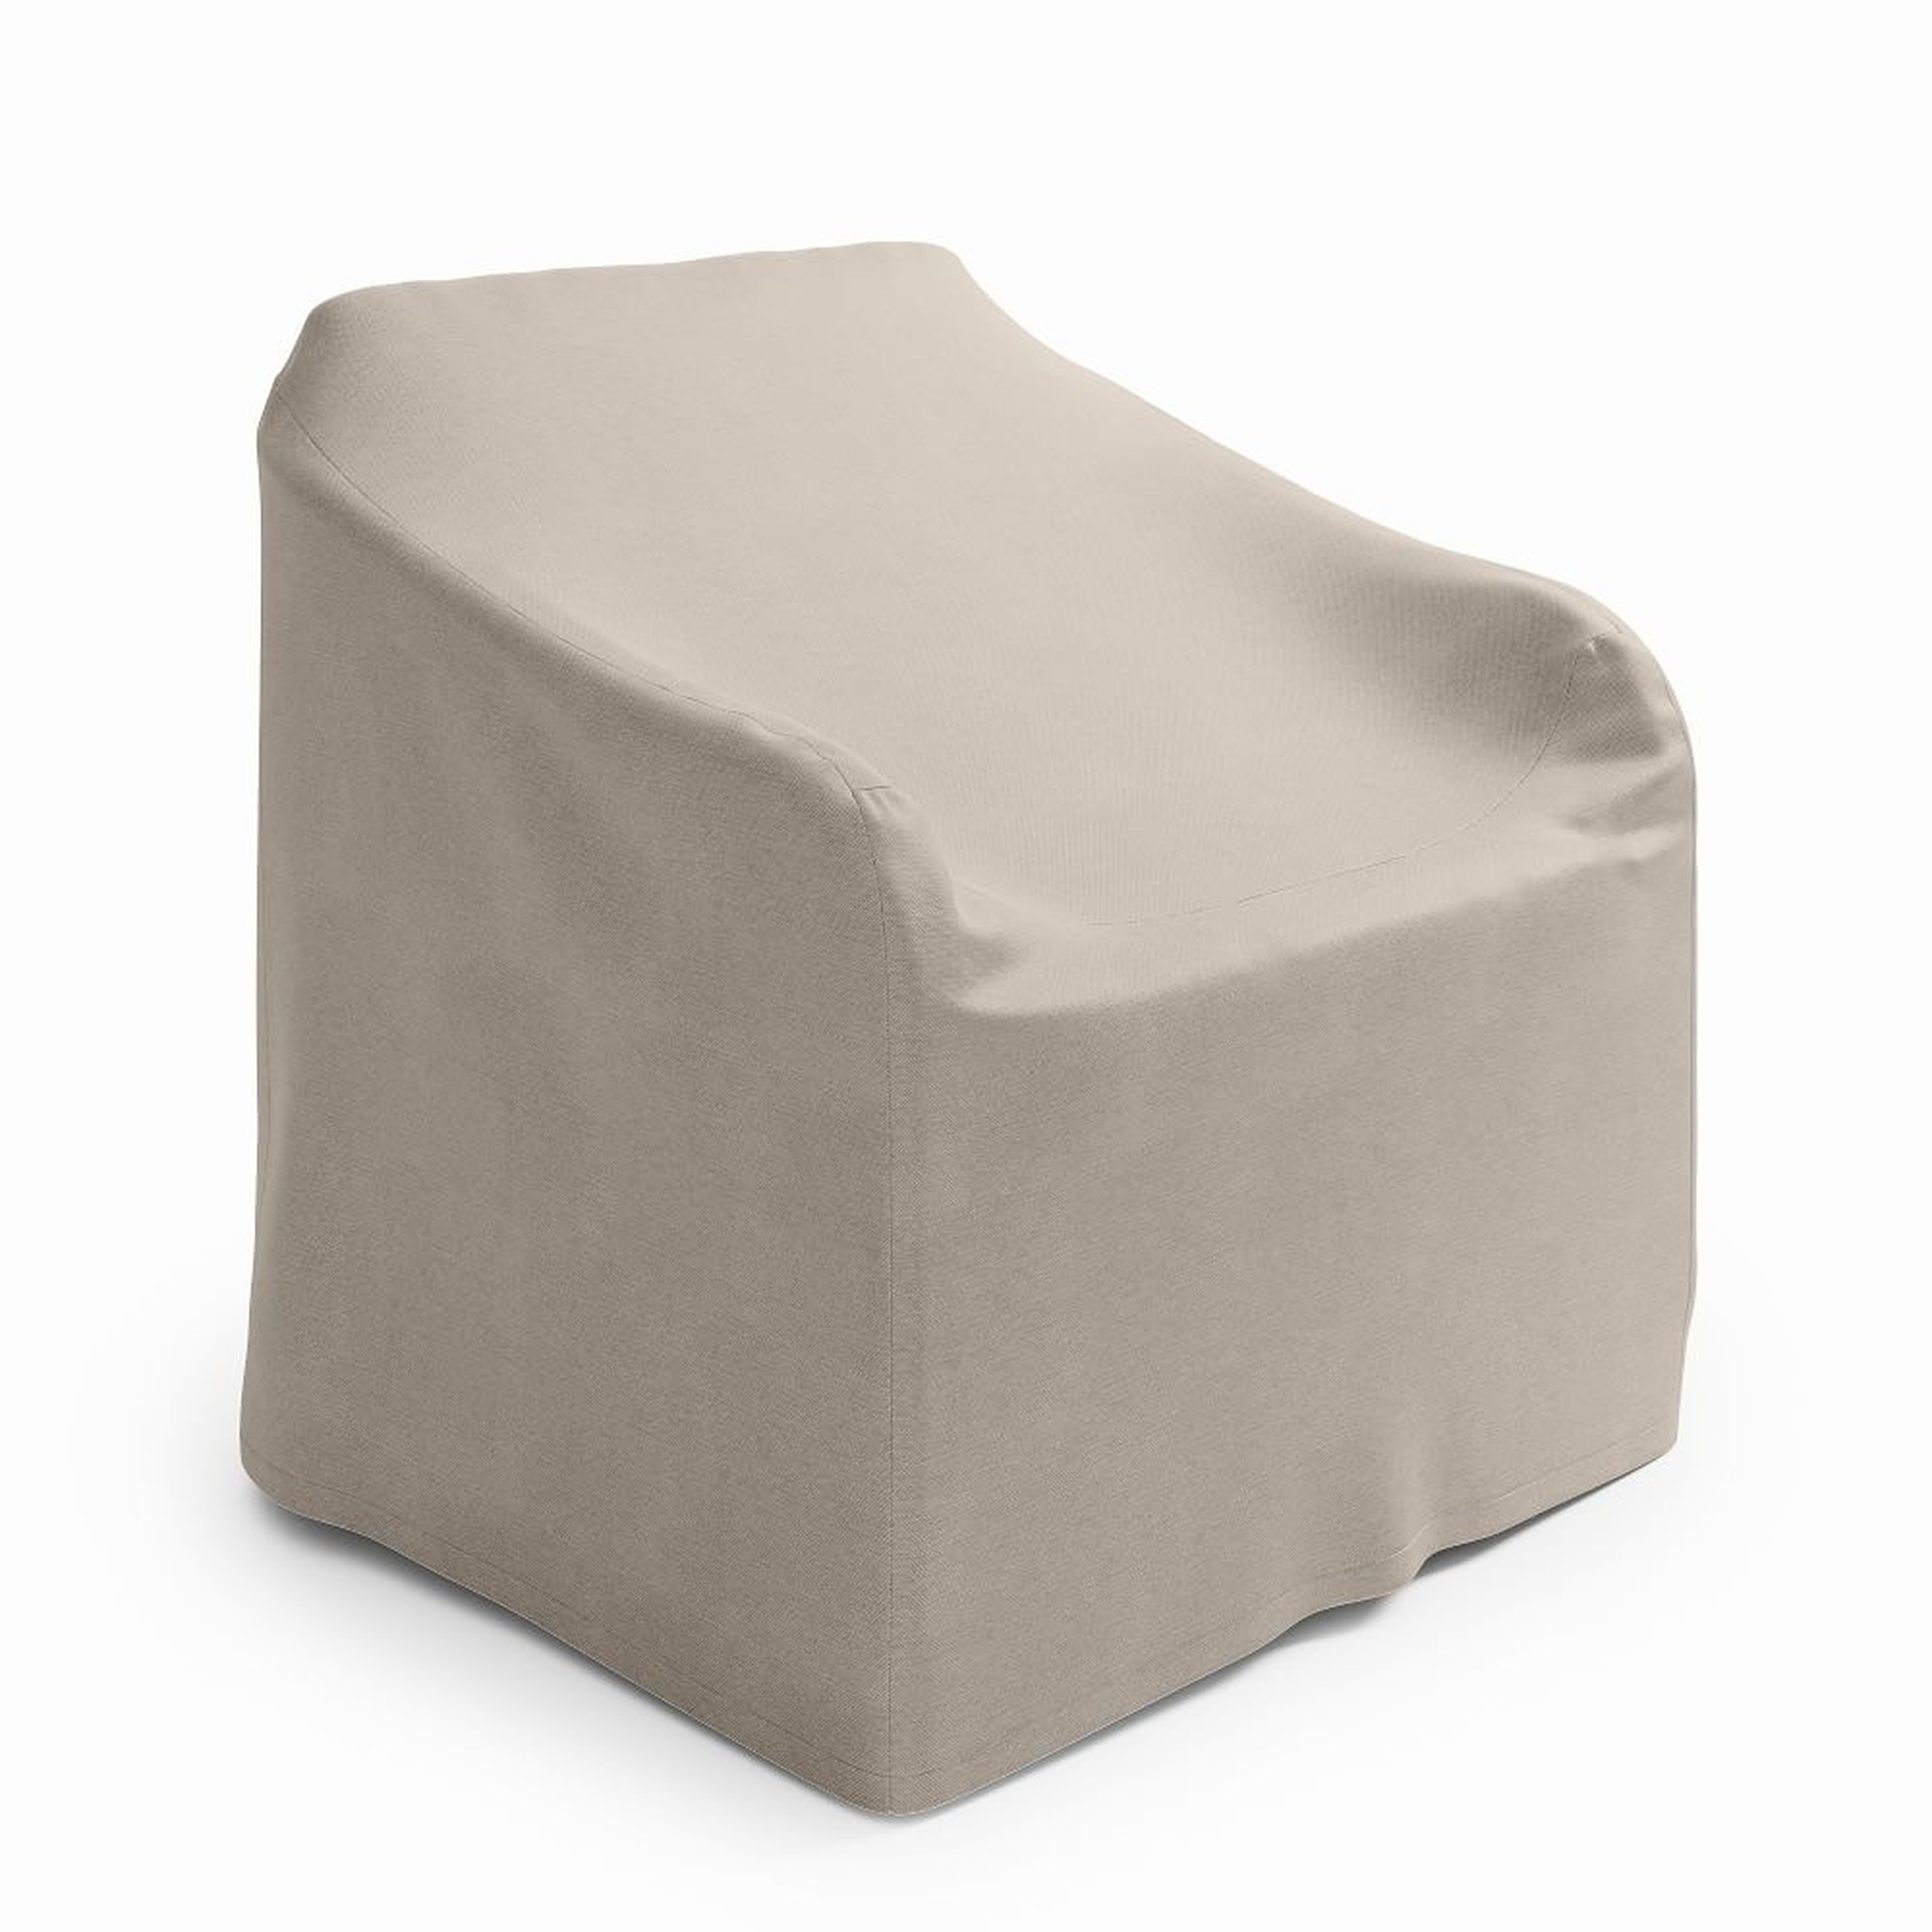 Tulum Lounge Chair Protective Cover - West Elm